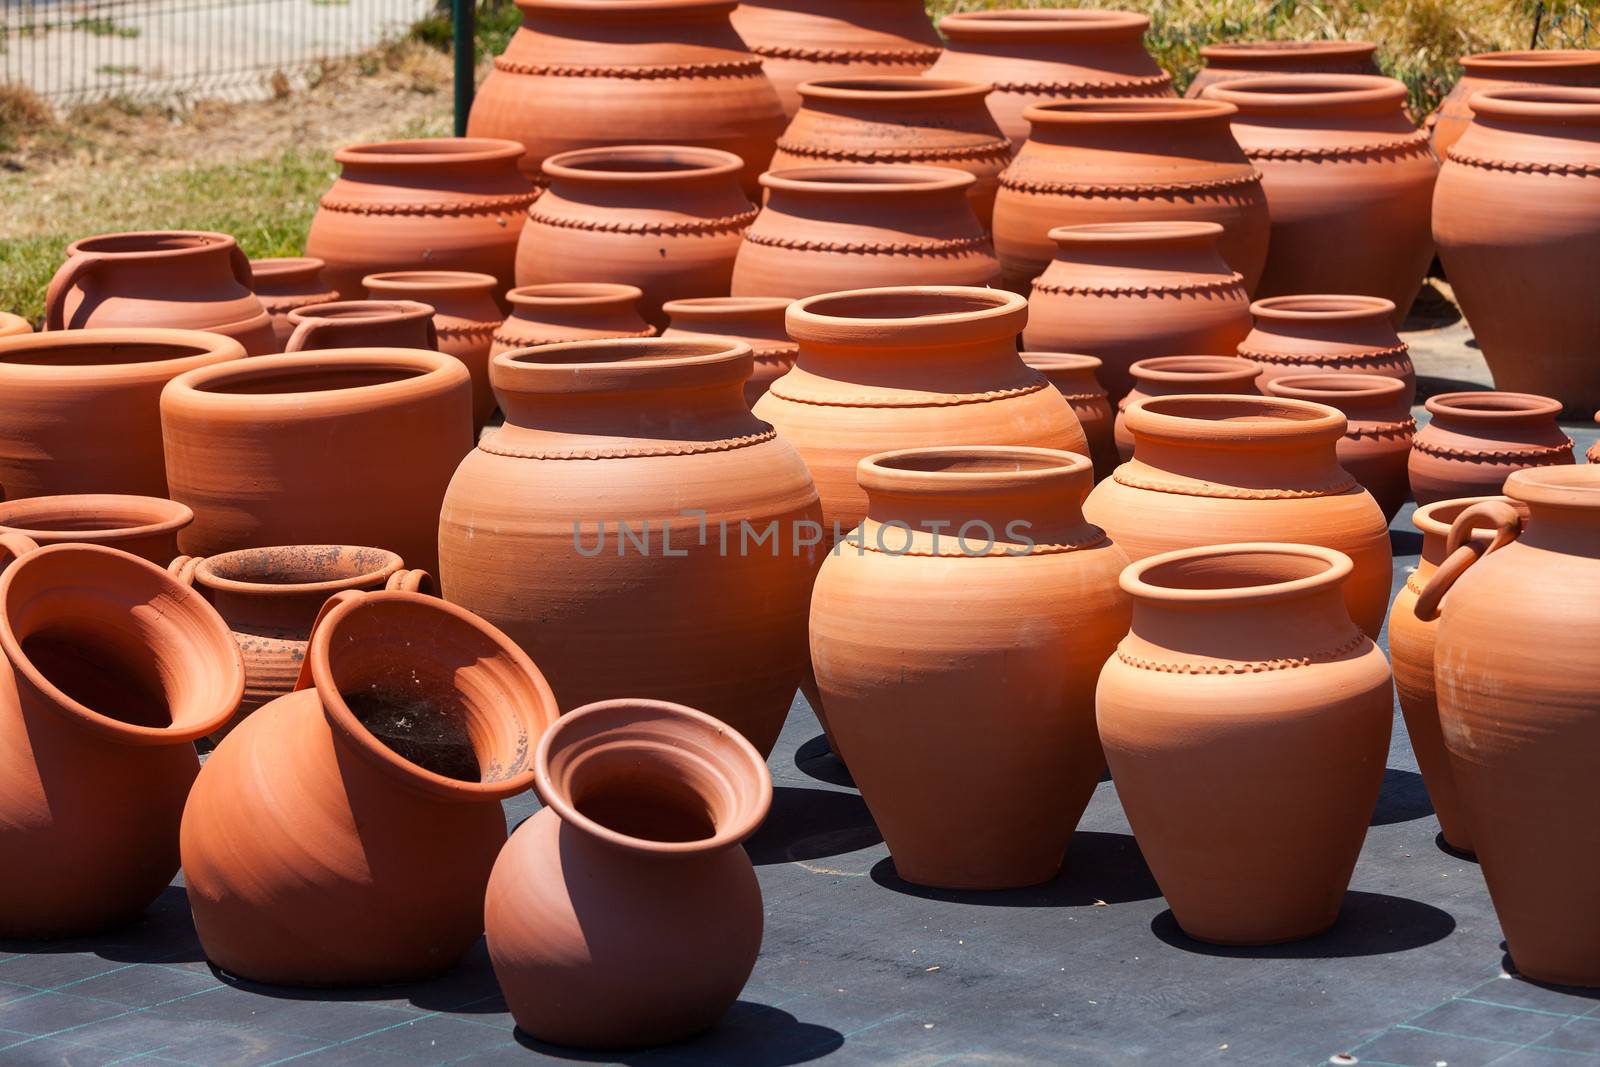 ceramic pots in market by Discovod